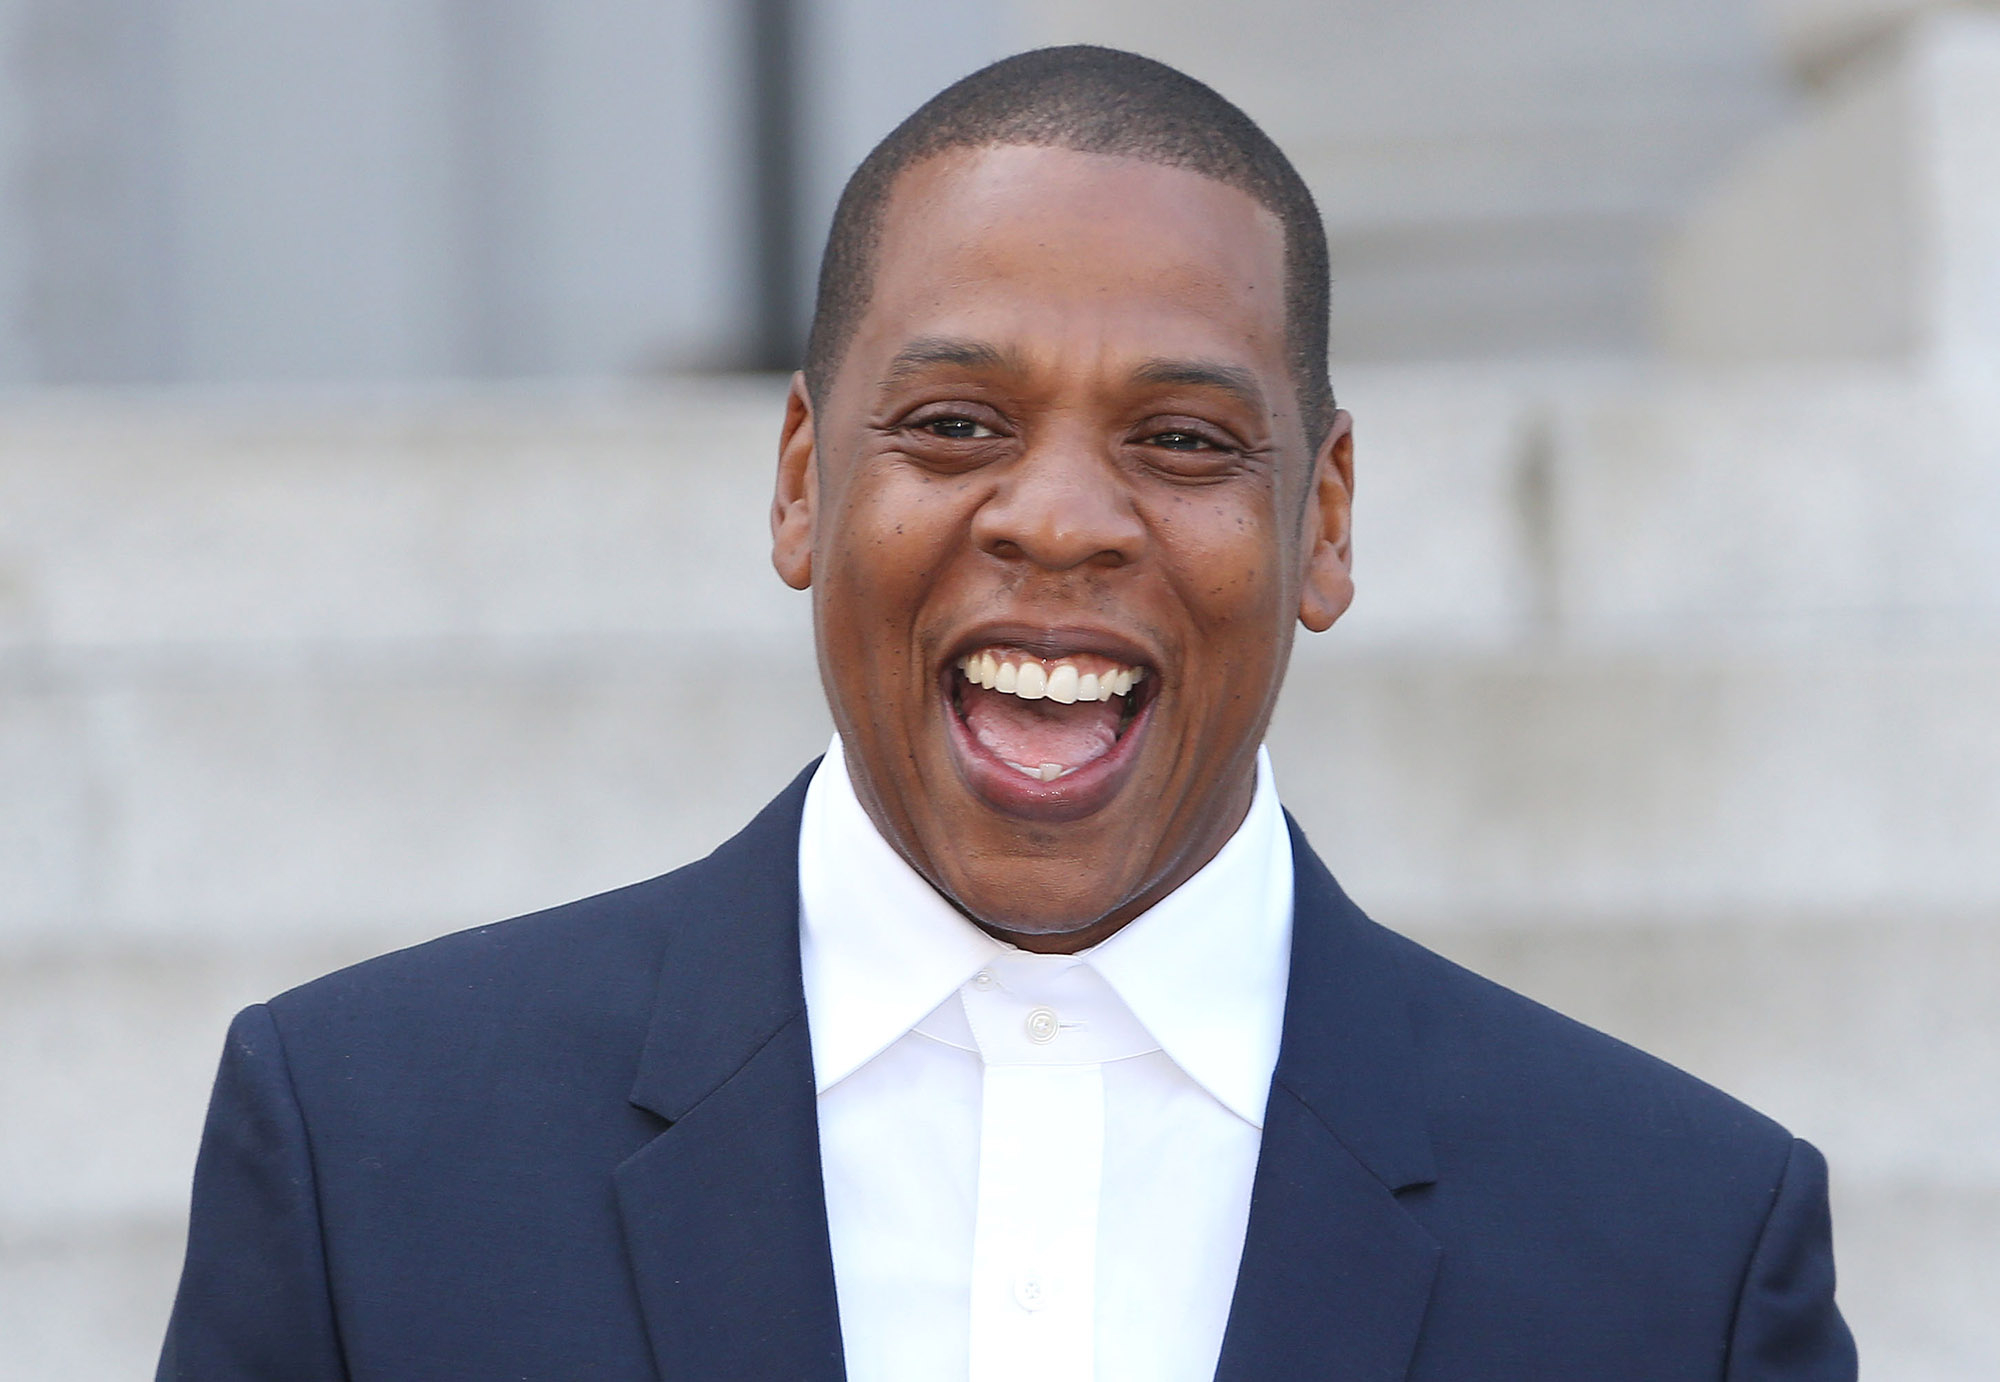 Shawn "Jay Z" Carter Makes Announcement On the Steps Of City Hall Downtown Los Angeles